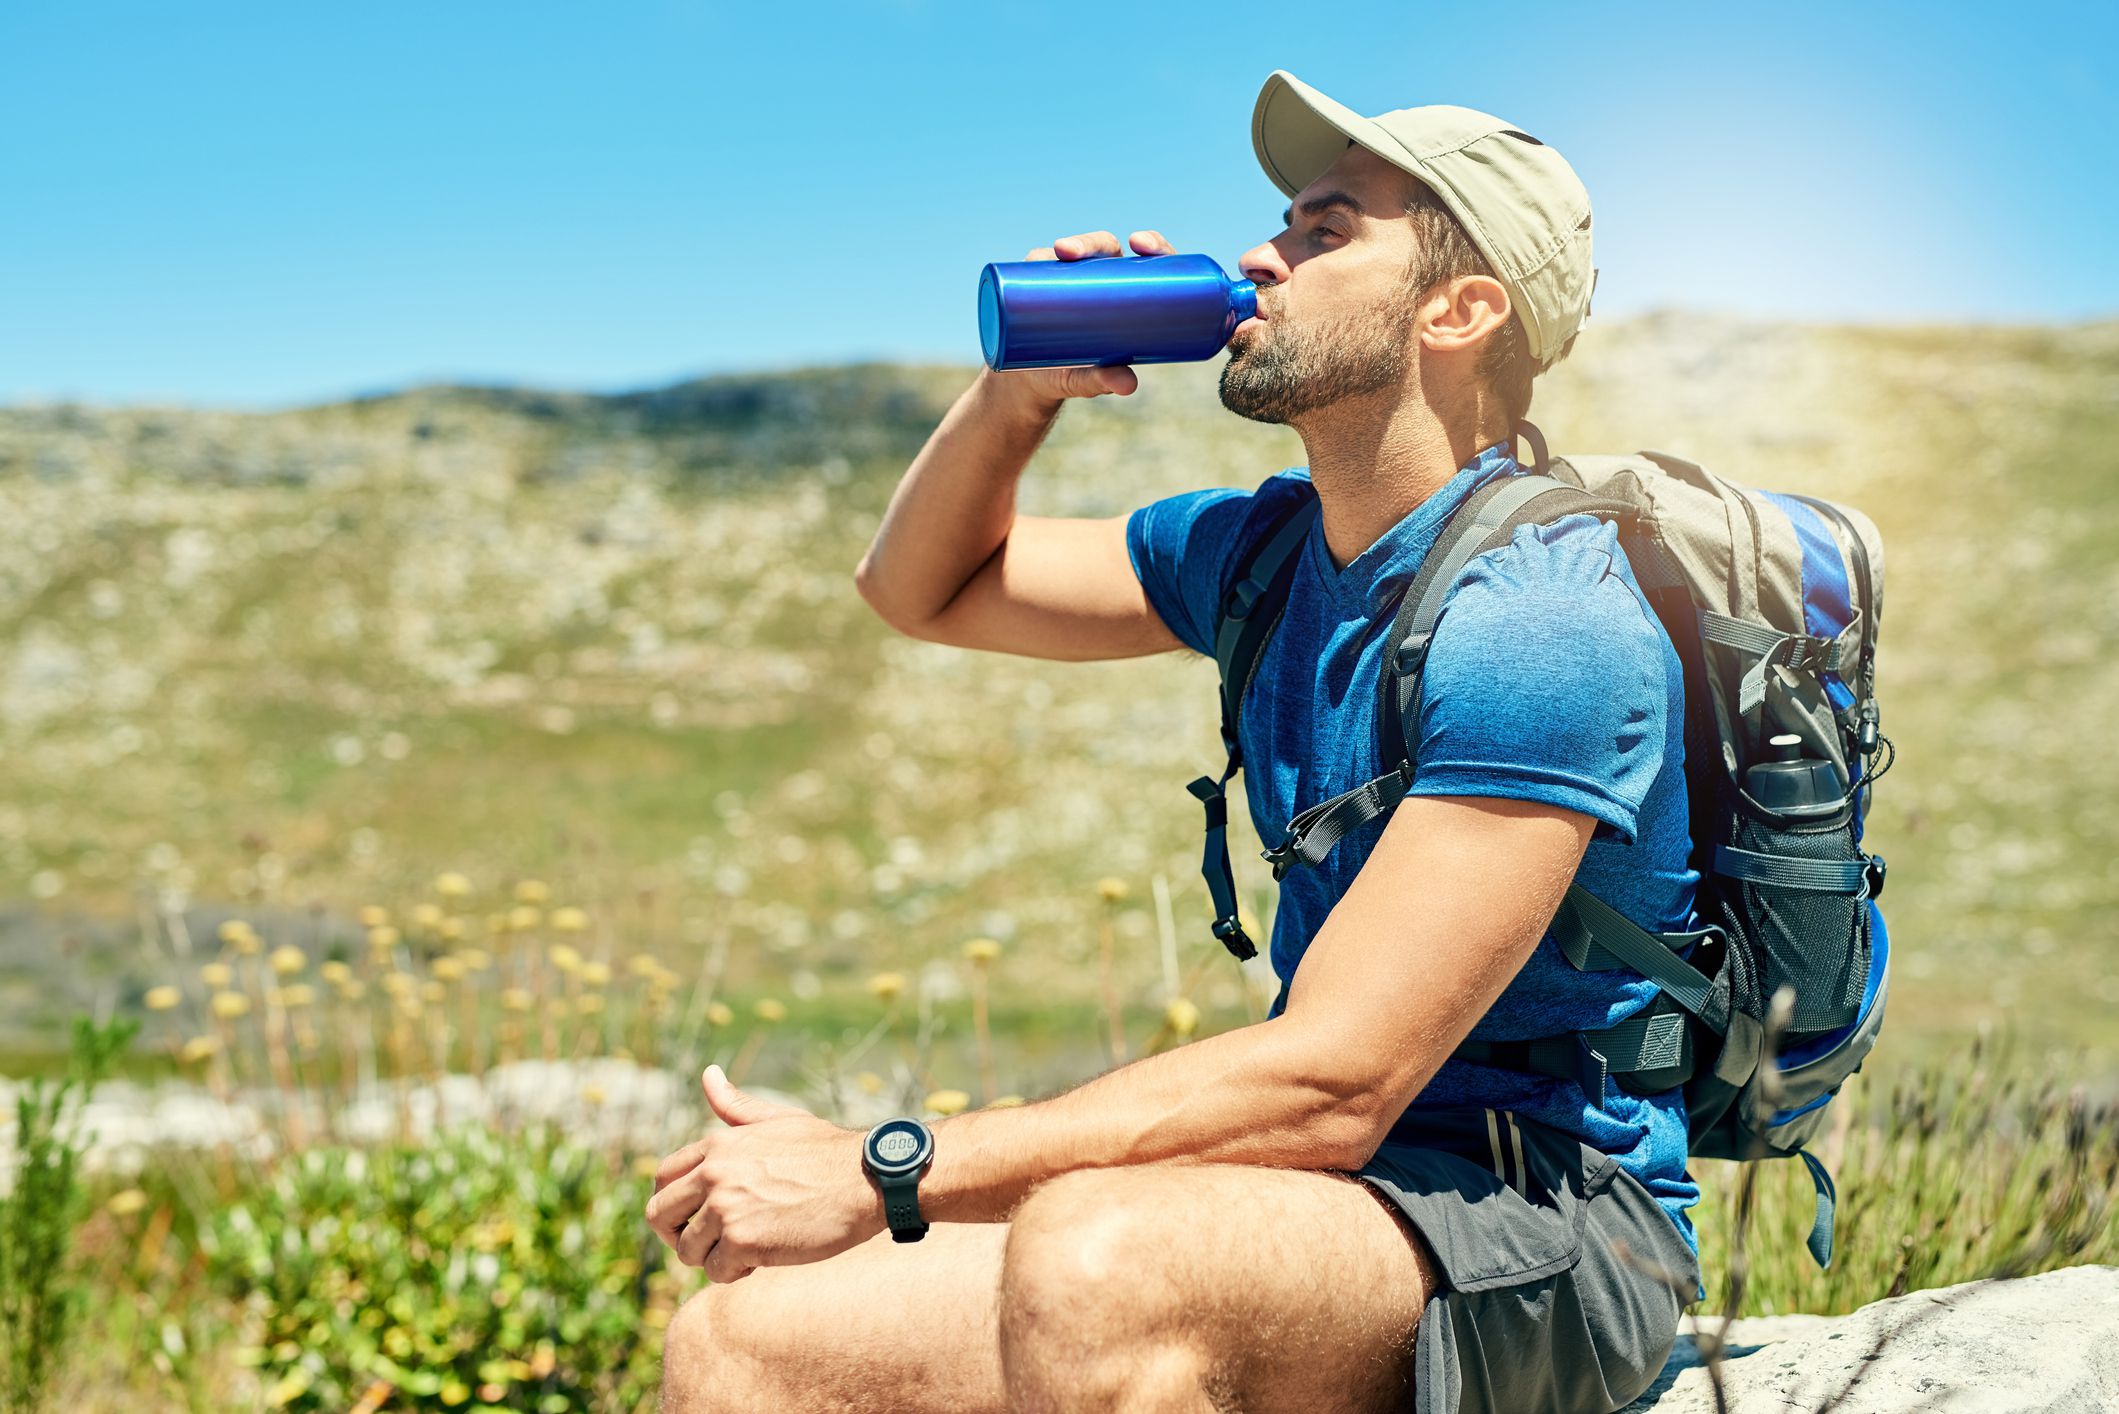 Leak-Proof, Durable, and Lightweight: 8 Water Bottles for Your Next Adventure